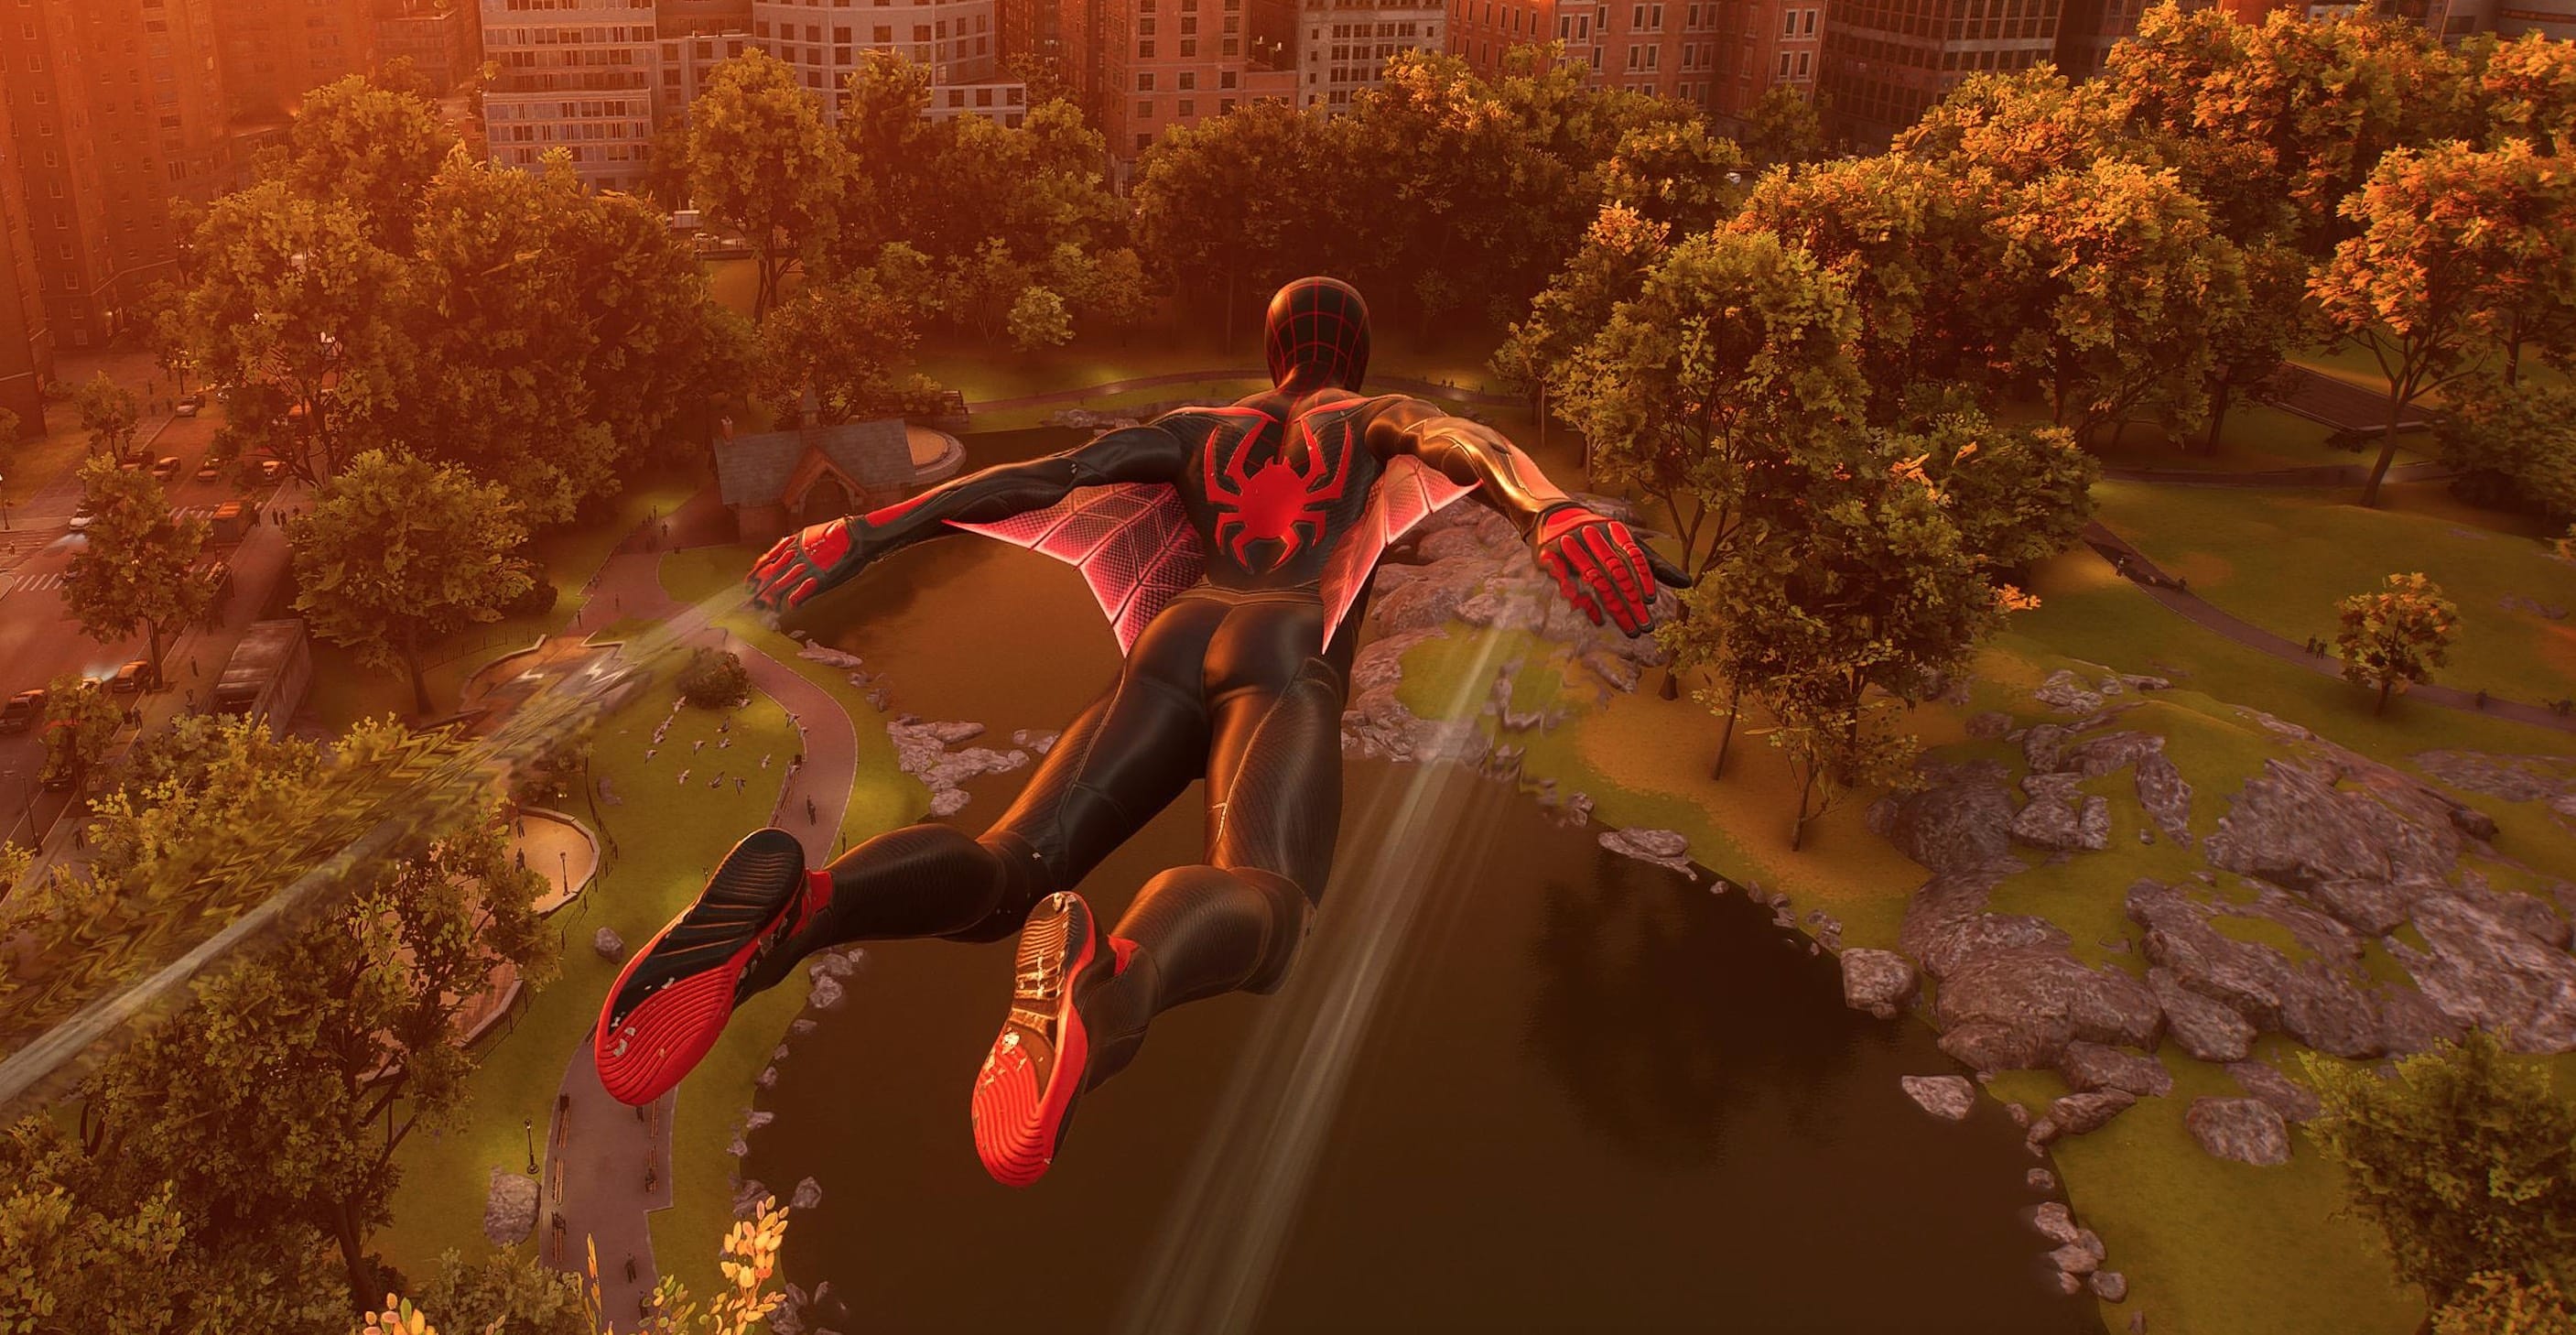 Marvel's Spider-Man 2 Review  Exactly what a superhero game should be